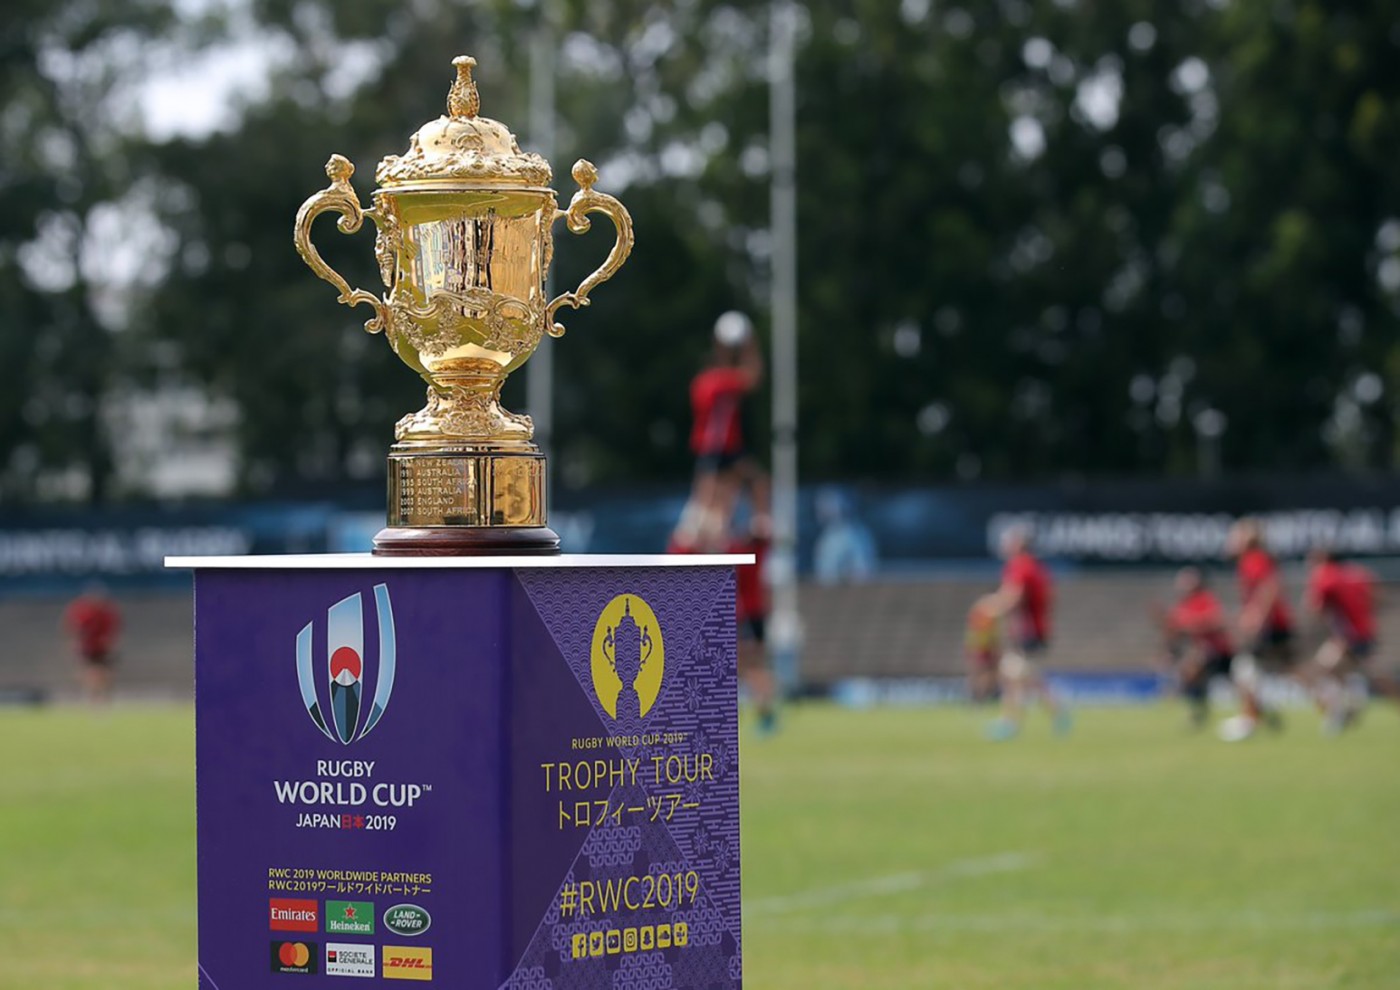 Rugby World Cup - Webb Ellis Trophy - Esports opportunities